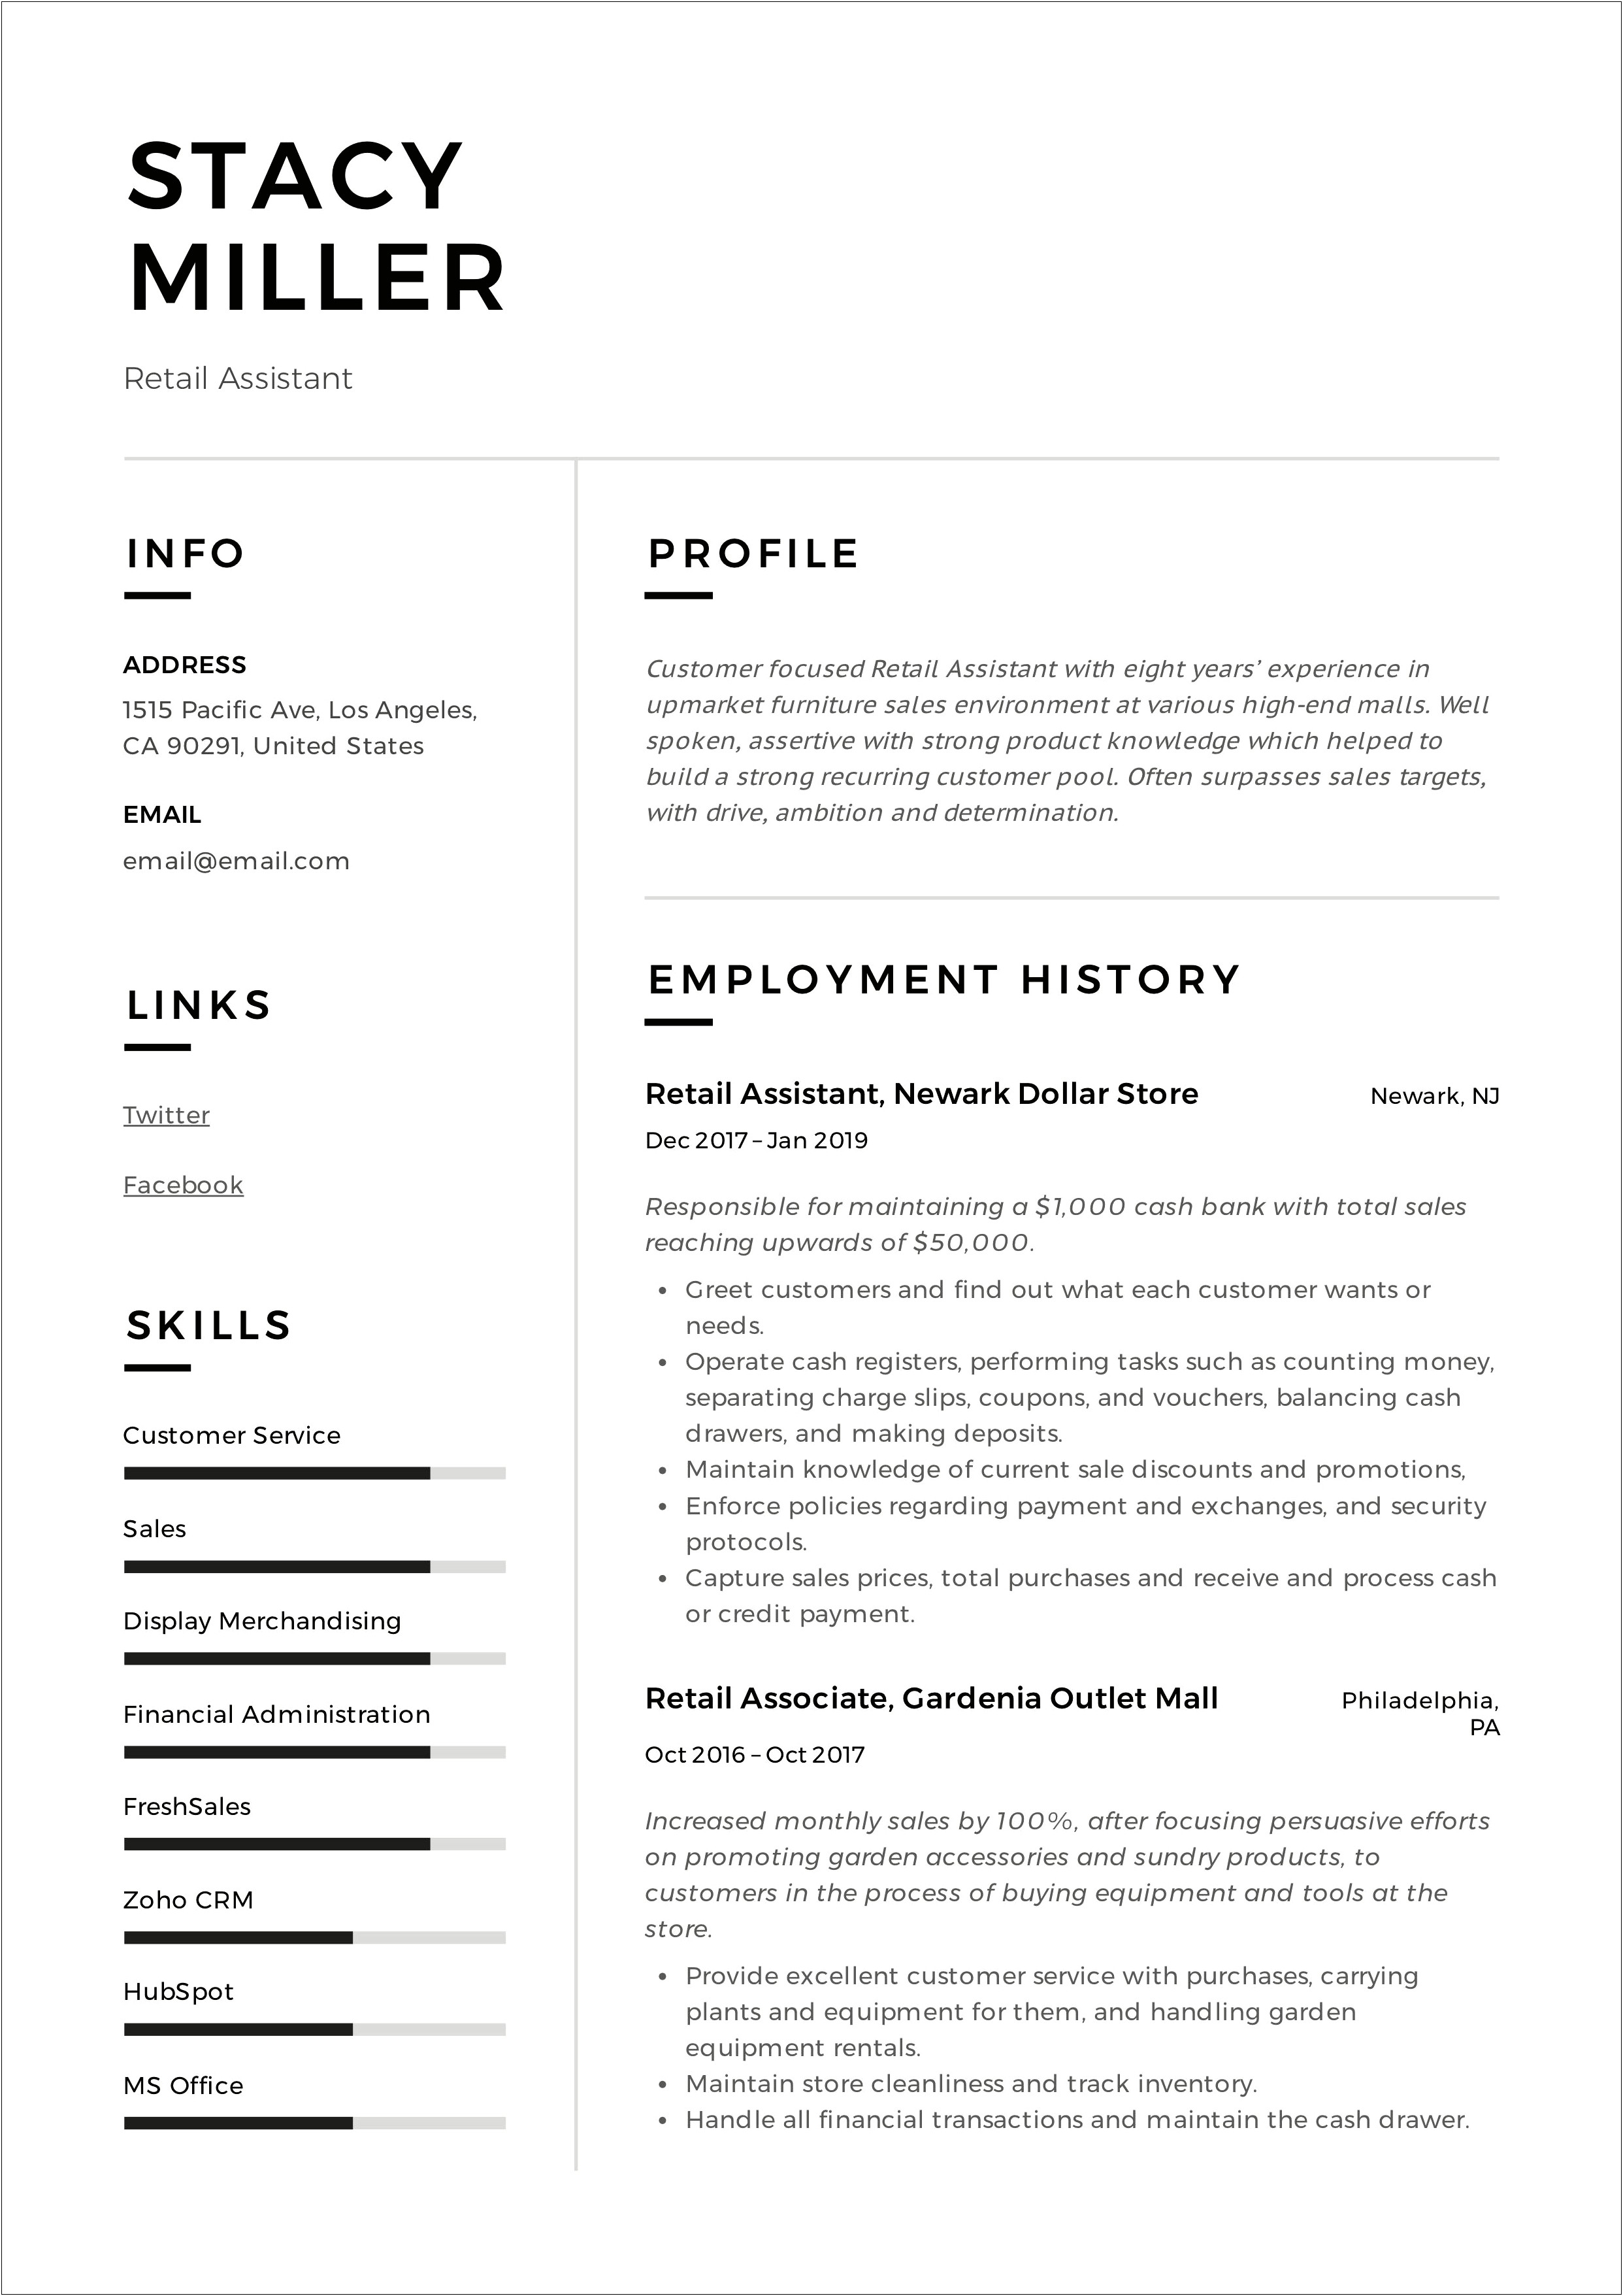 Appling For A Store Resume Examples